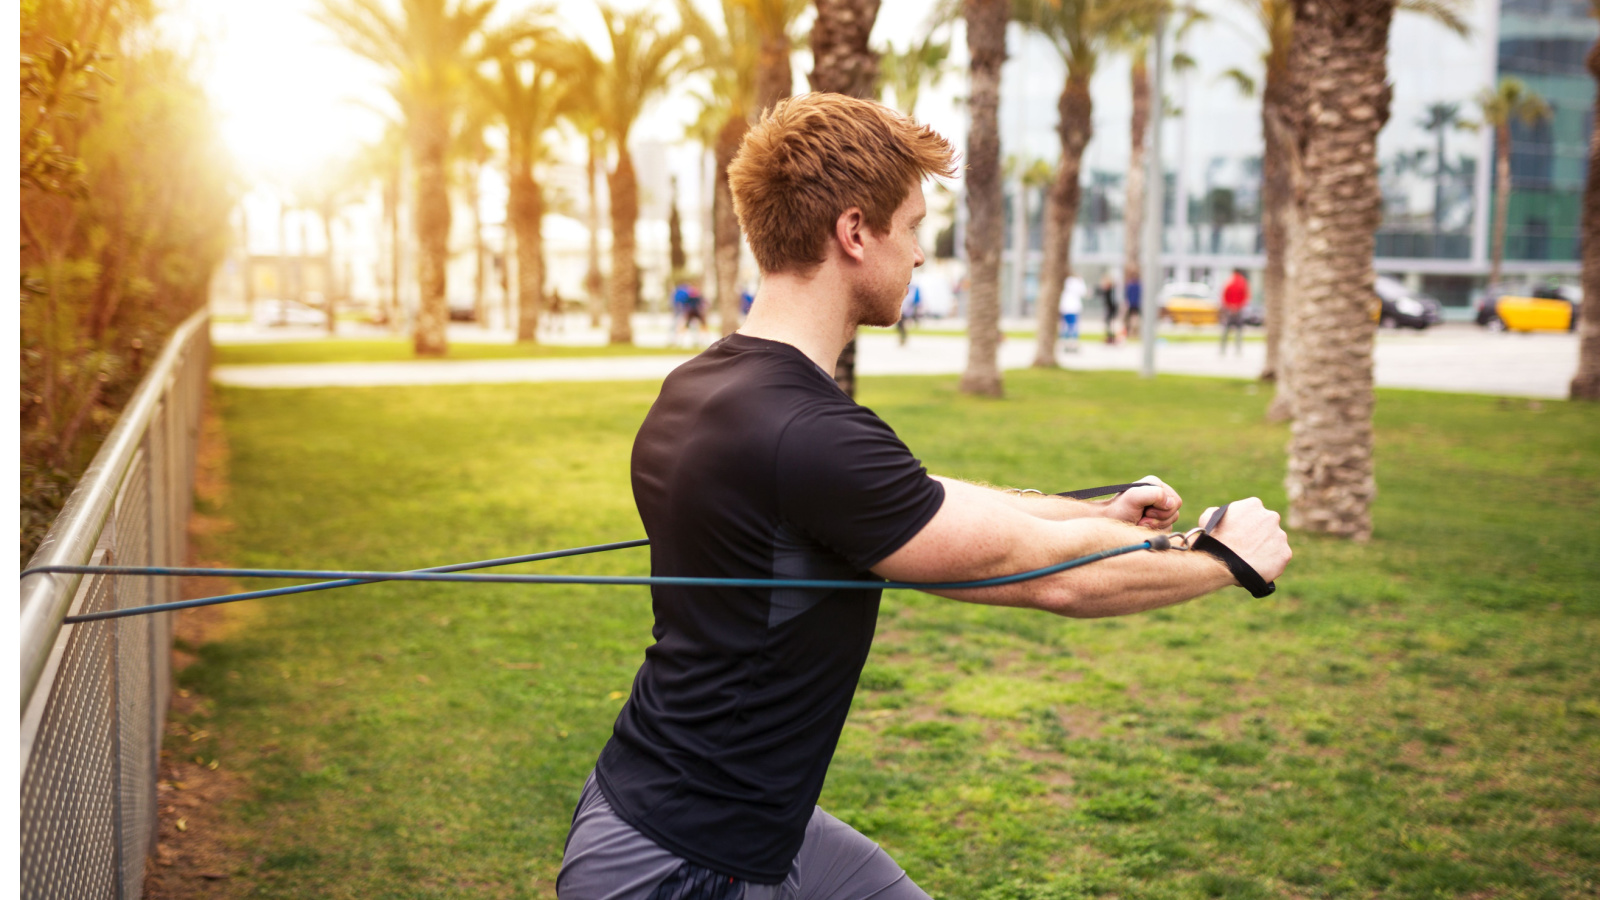 Free Weights vs. Resistance Bands: Challenge Your Muscles the Right Way